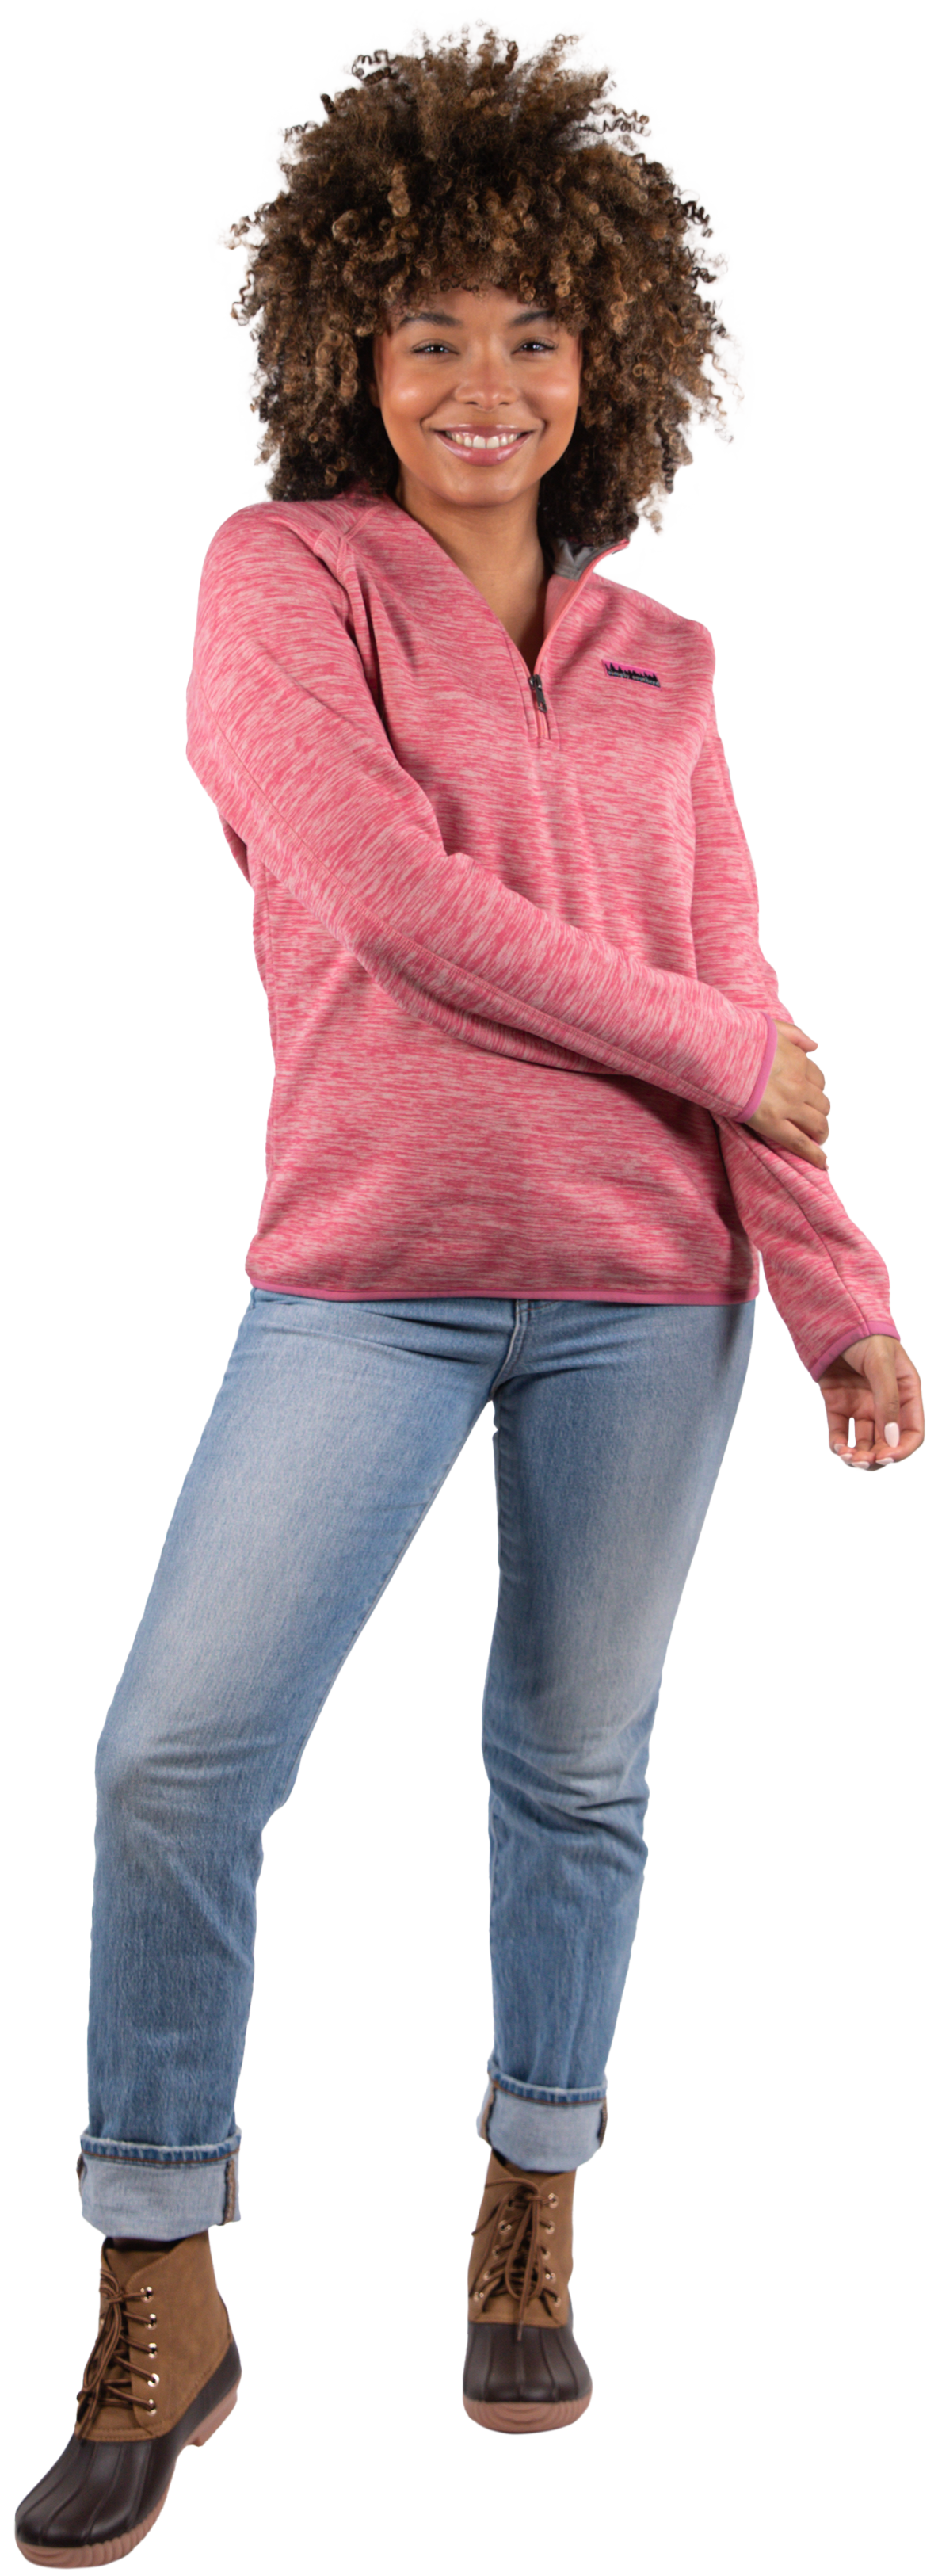 SIMPLY SWEATER - HEATHER PINK - YL